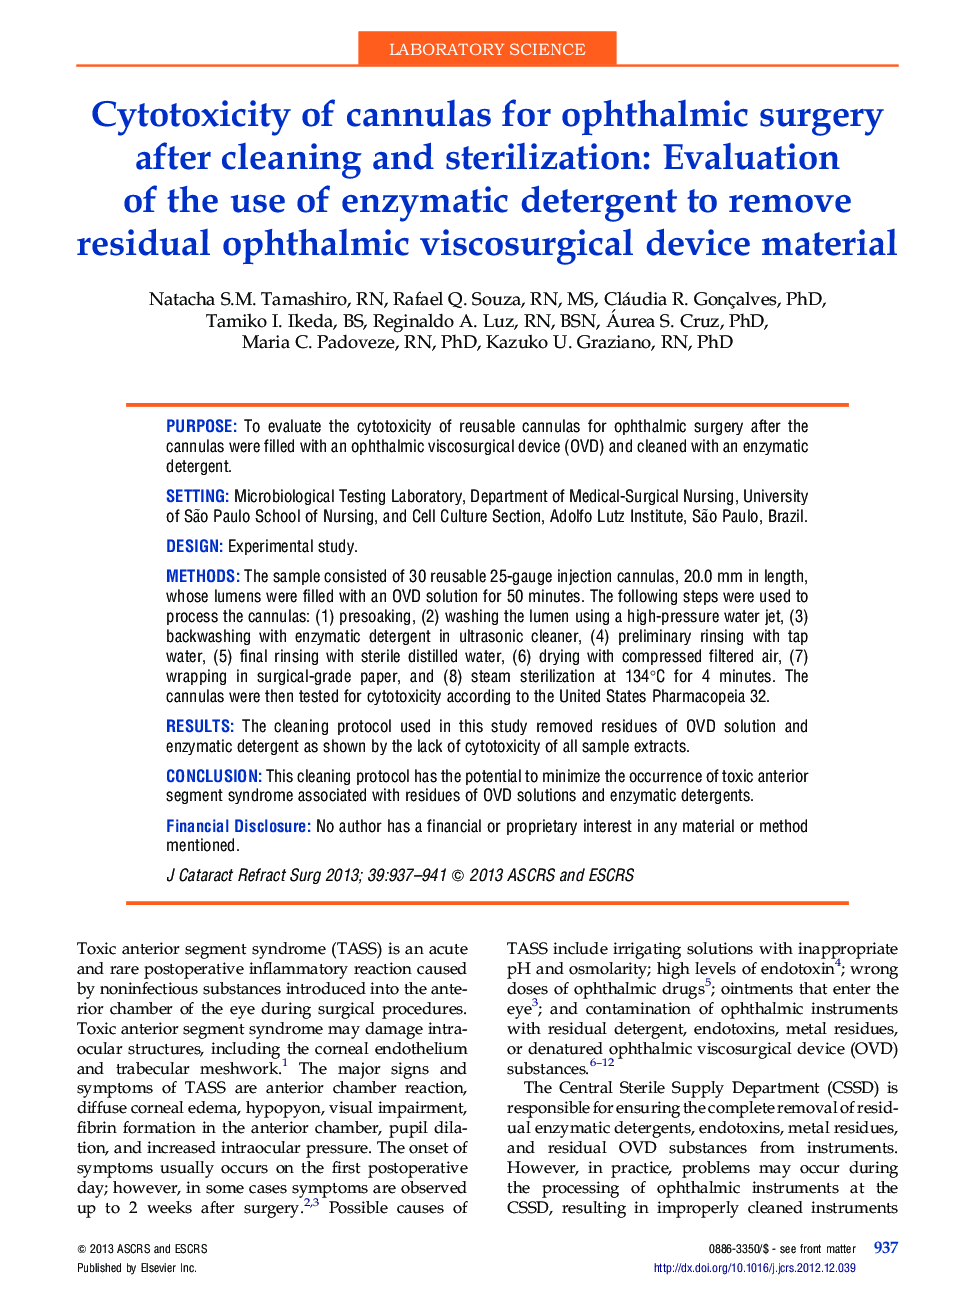 Cytotoxicity of cannulas for ophthalmic surgery after cleaning and sterilization: Evaluation of the use of enzymatic detergent to remove residual ophthalmic viscosurgical device material